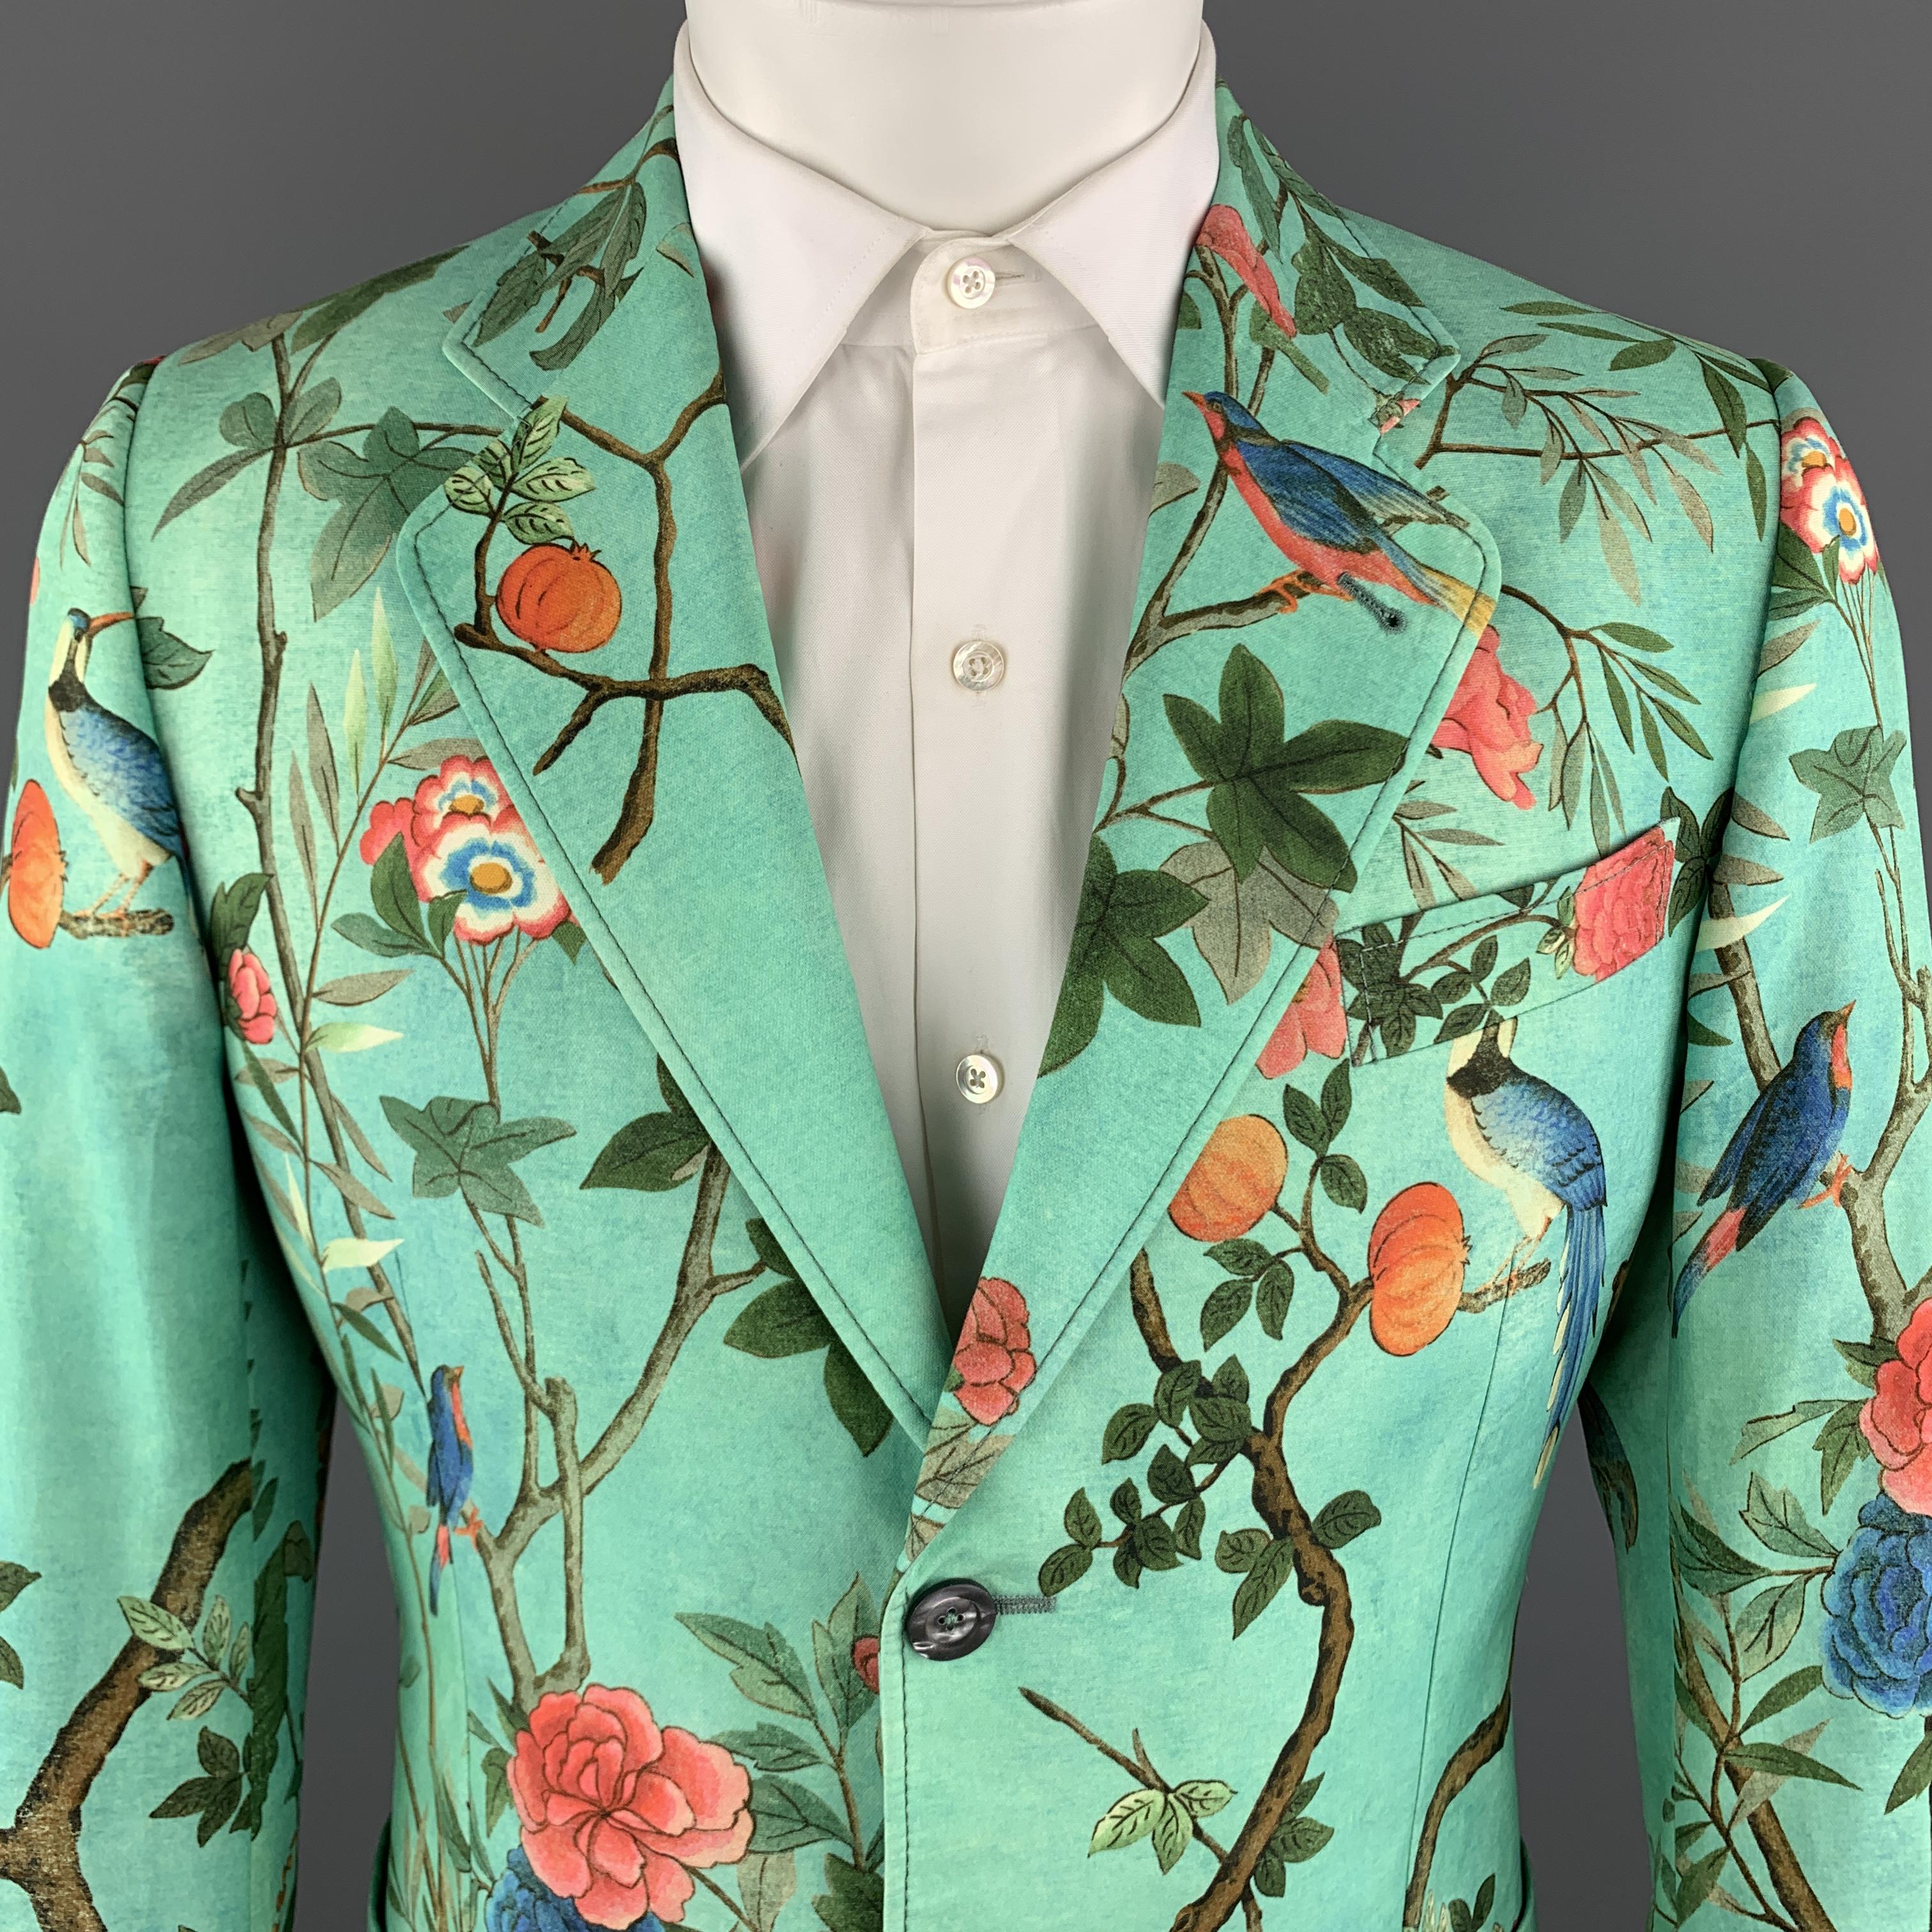 GUCCI Men's Spring Summer 2016 by Alessandro Michele Blazer Jacket / Sport Coat comes in a green heritage print cotton material, with a notch lapel, slit and patch pockets, two buttons at closure, single breasted, buttoned cuffs, a double vent at